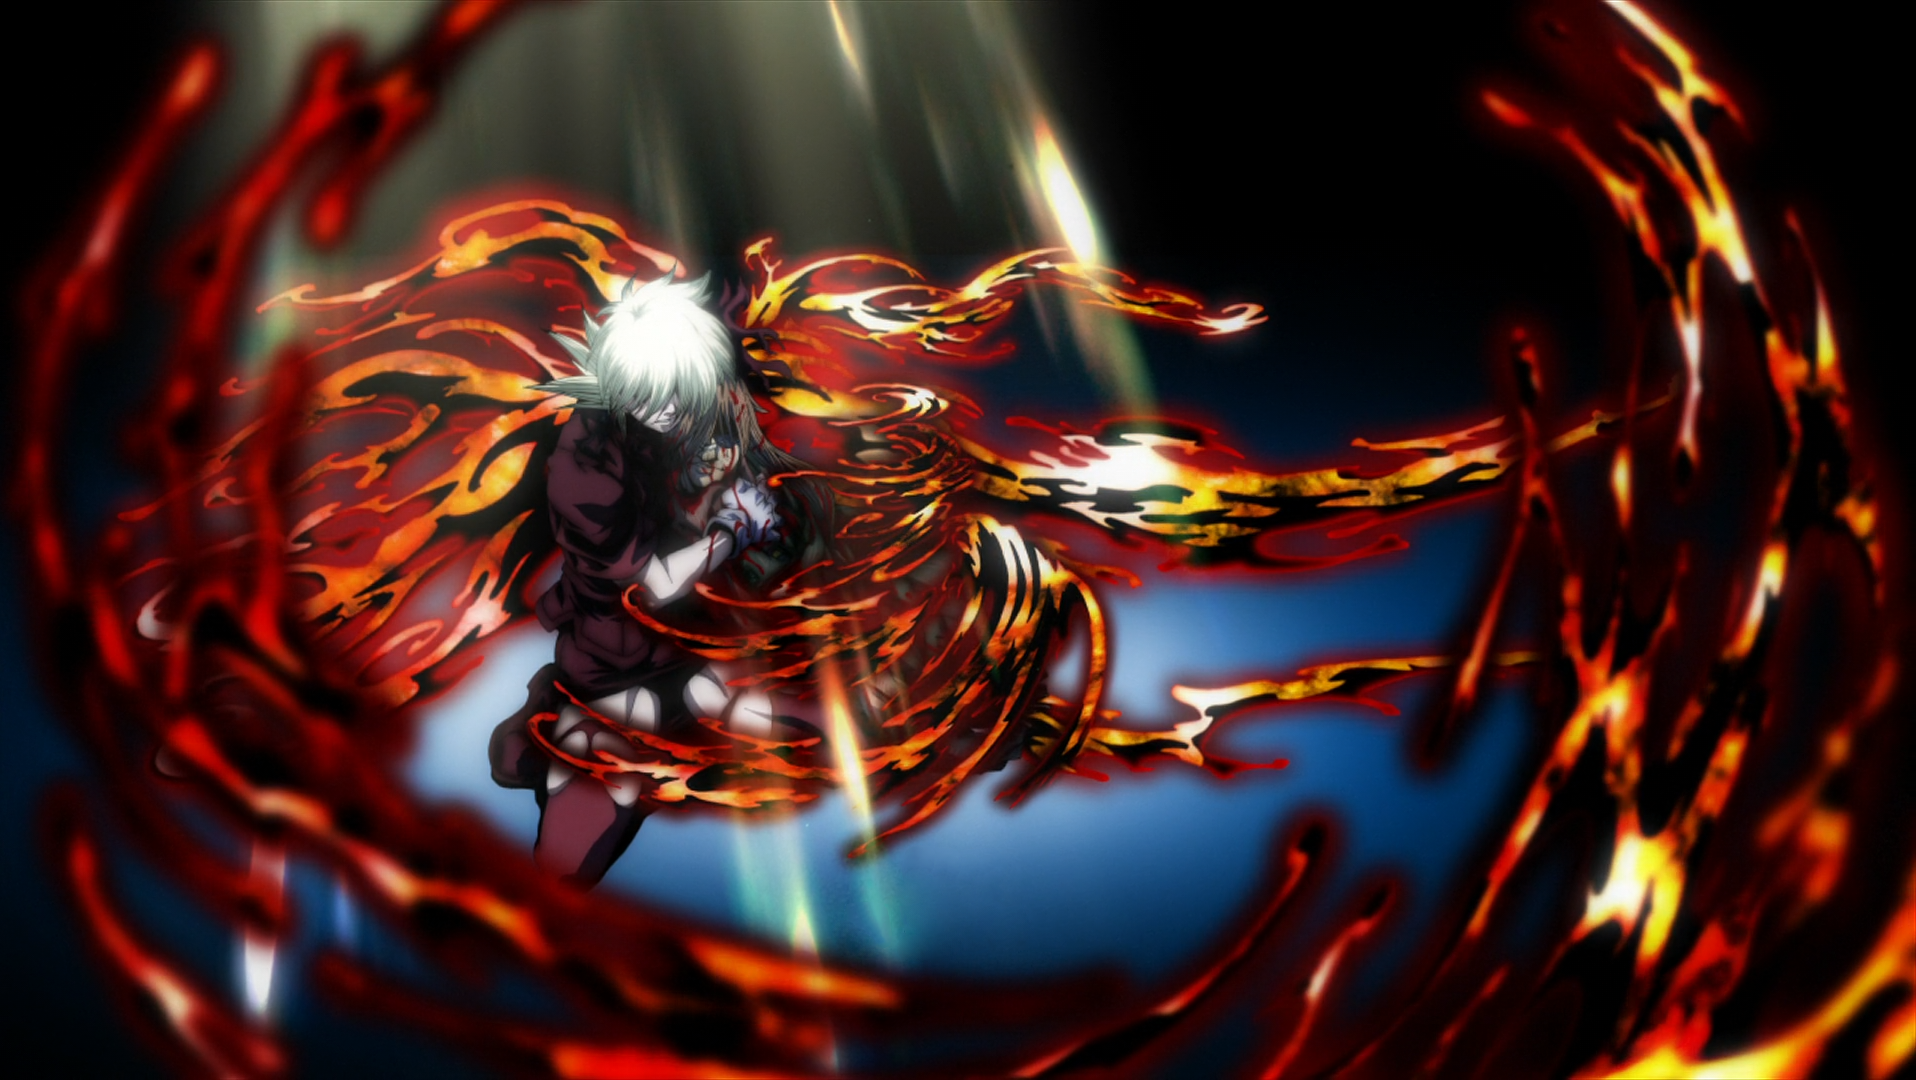 Download Captivating Hellsing Anime Character In Action Wallpaper